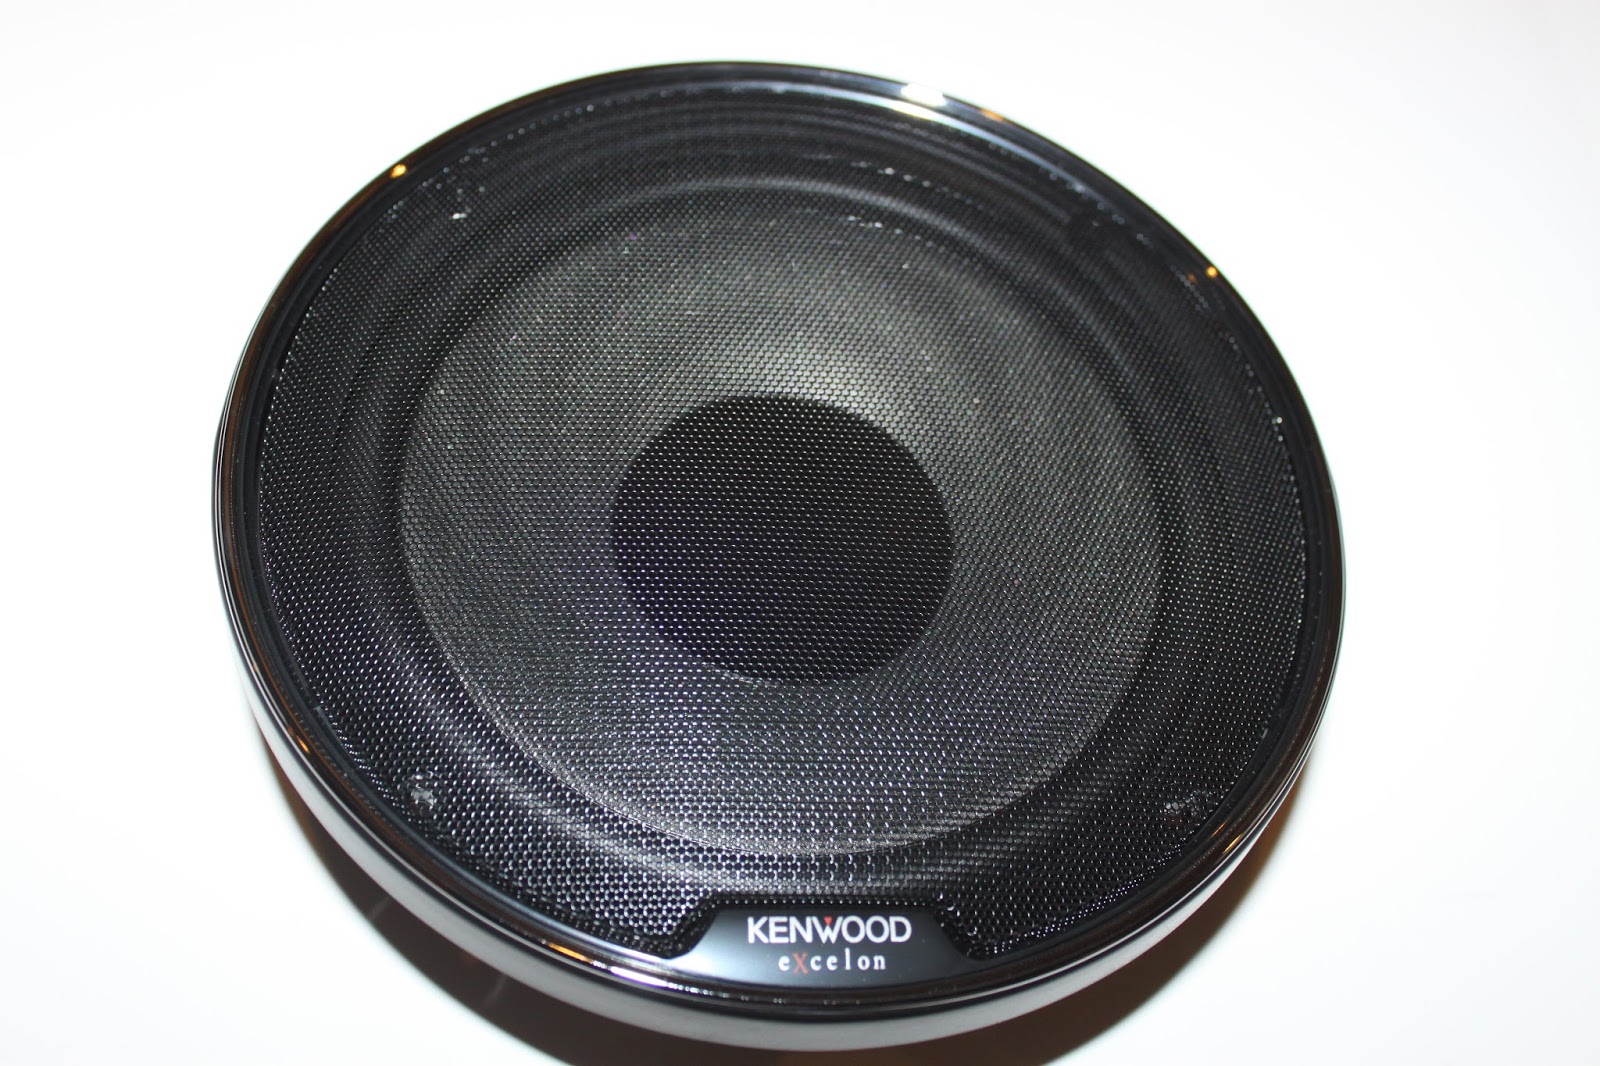 Stereowise Plus Kenwood Excelon XR1800P 7" Component Speaker System by Jeff Merrill